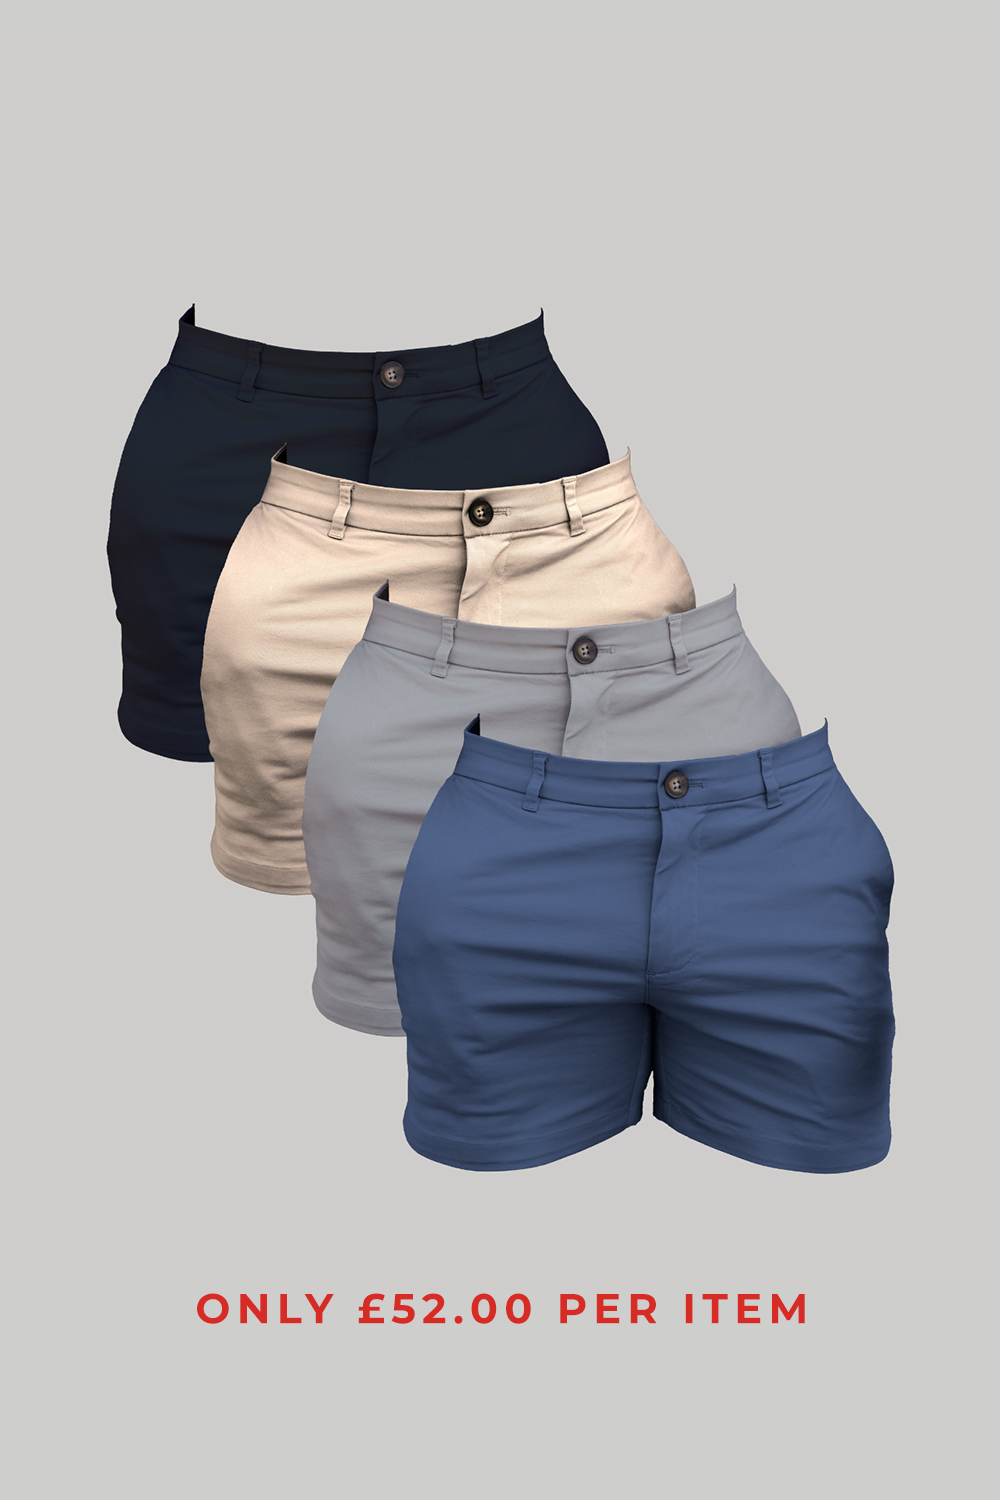 Muscle Fit Chino Shorts - Shorter Length 4-Pack - TAILORED ATHLETE - ROW